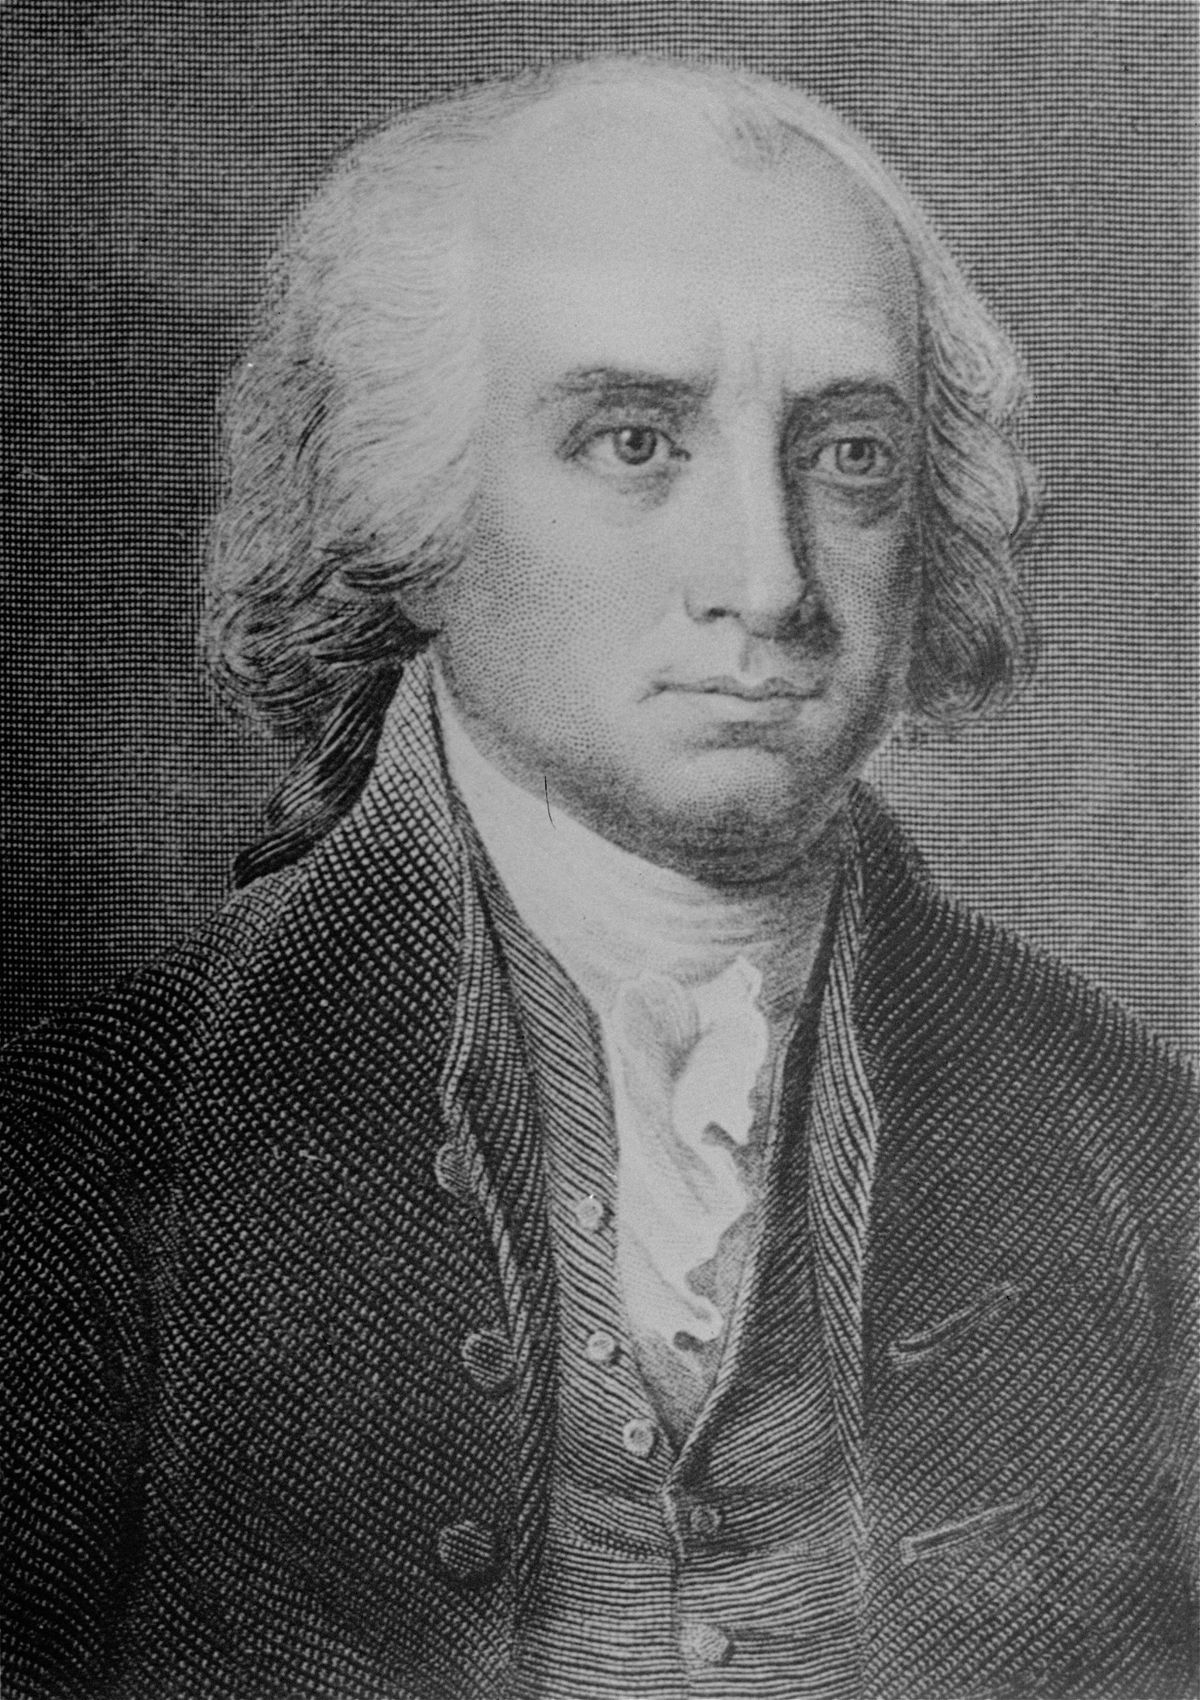 This is an undated engraving of James Madison, the fourth president of the U.S. from 1809 to 1817. Madison was on of the authors of the Federalist Papers.  (Associated Press)